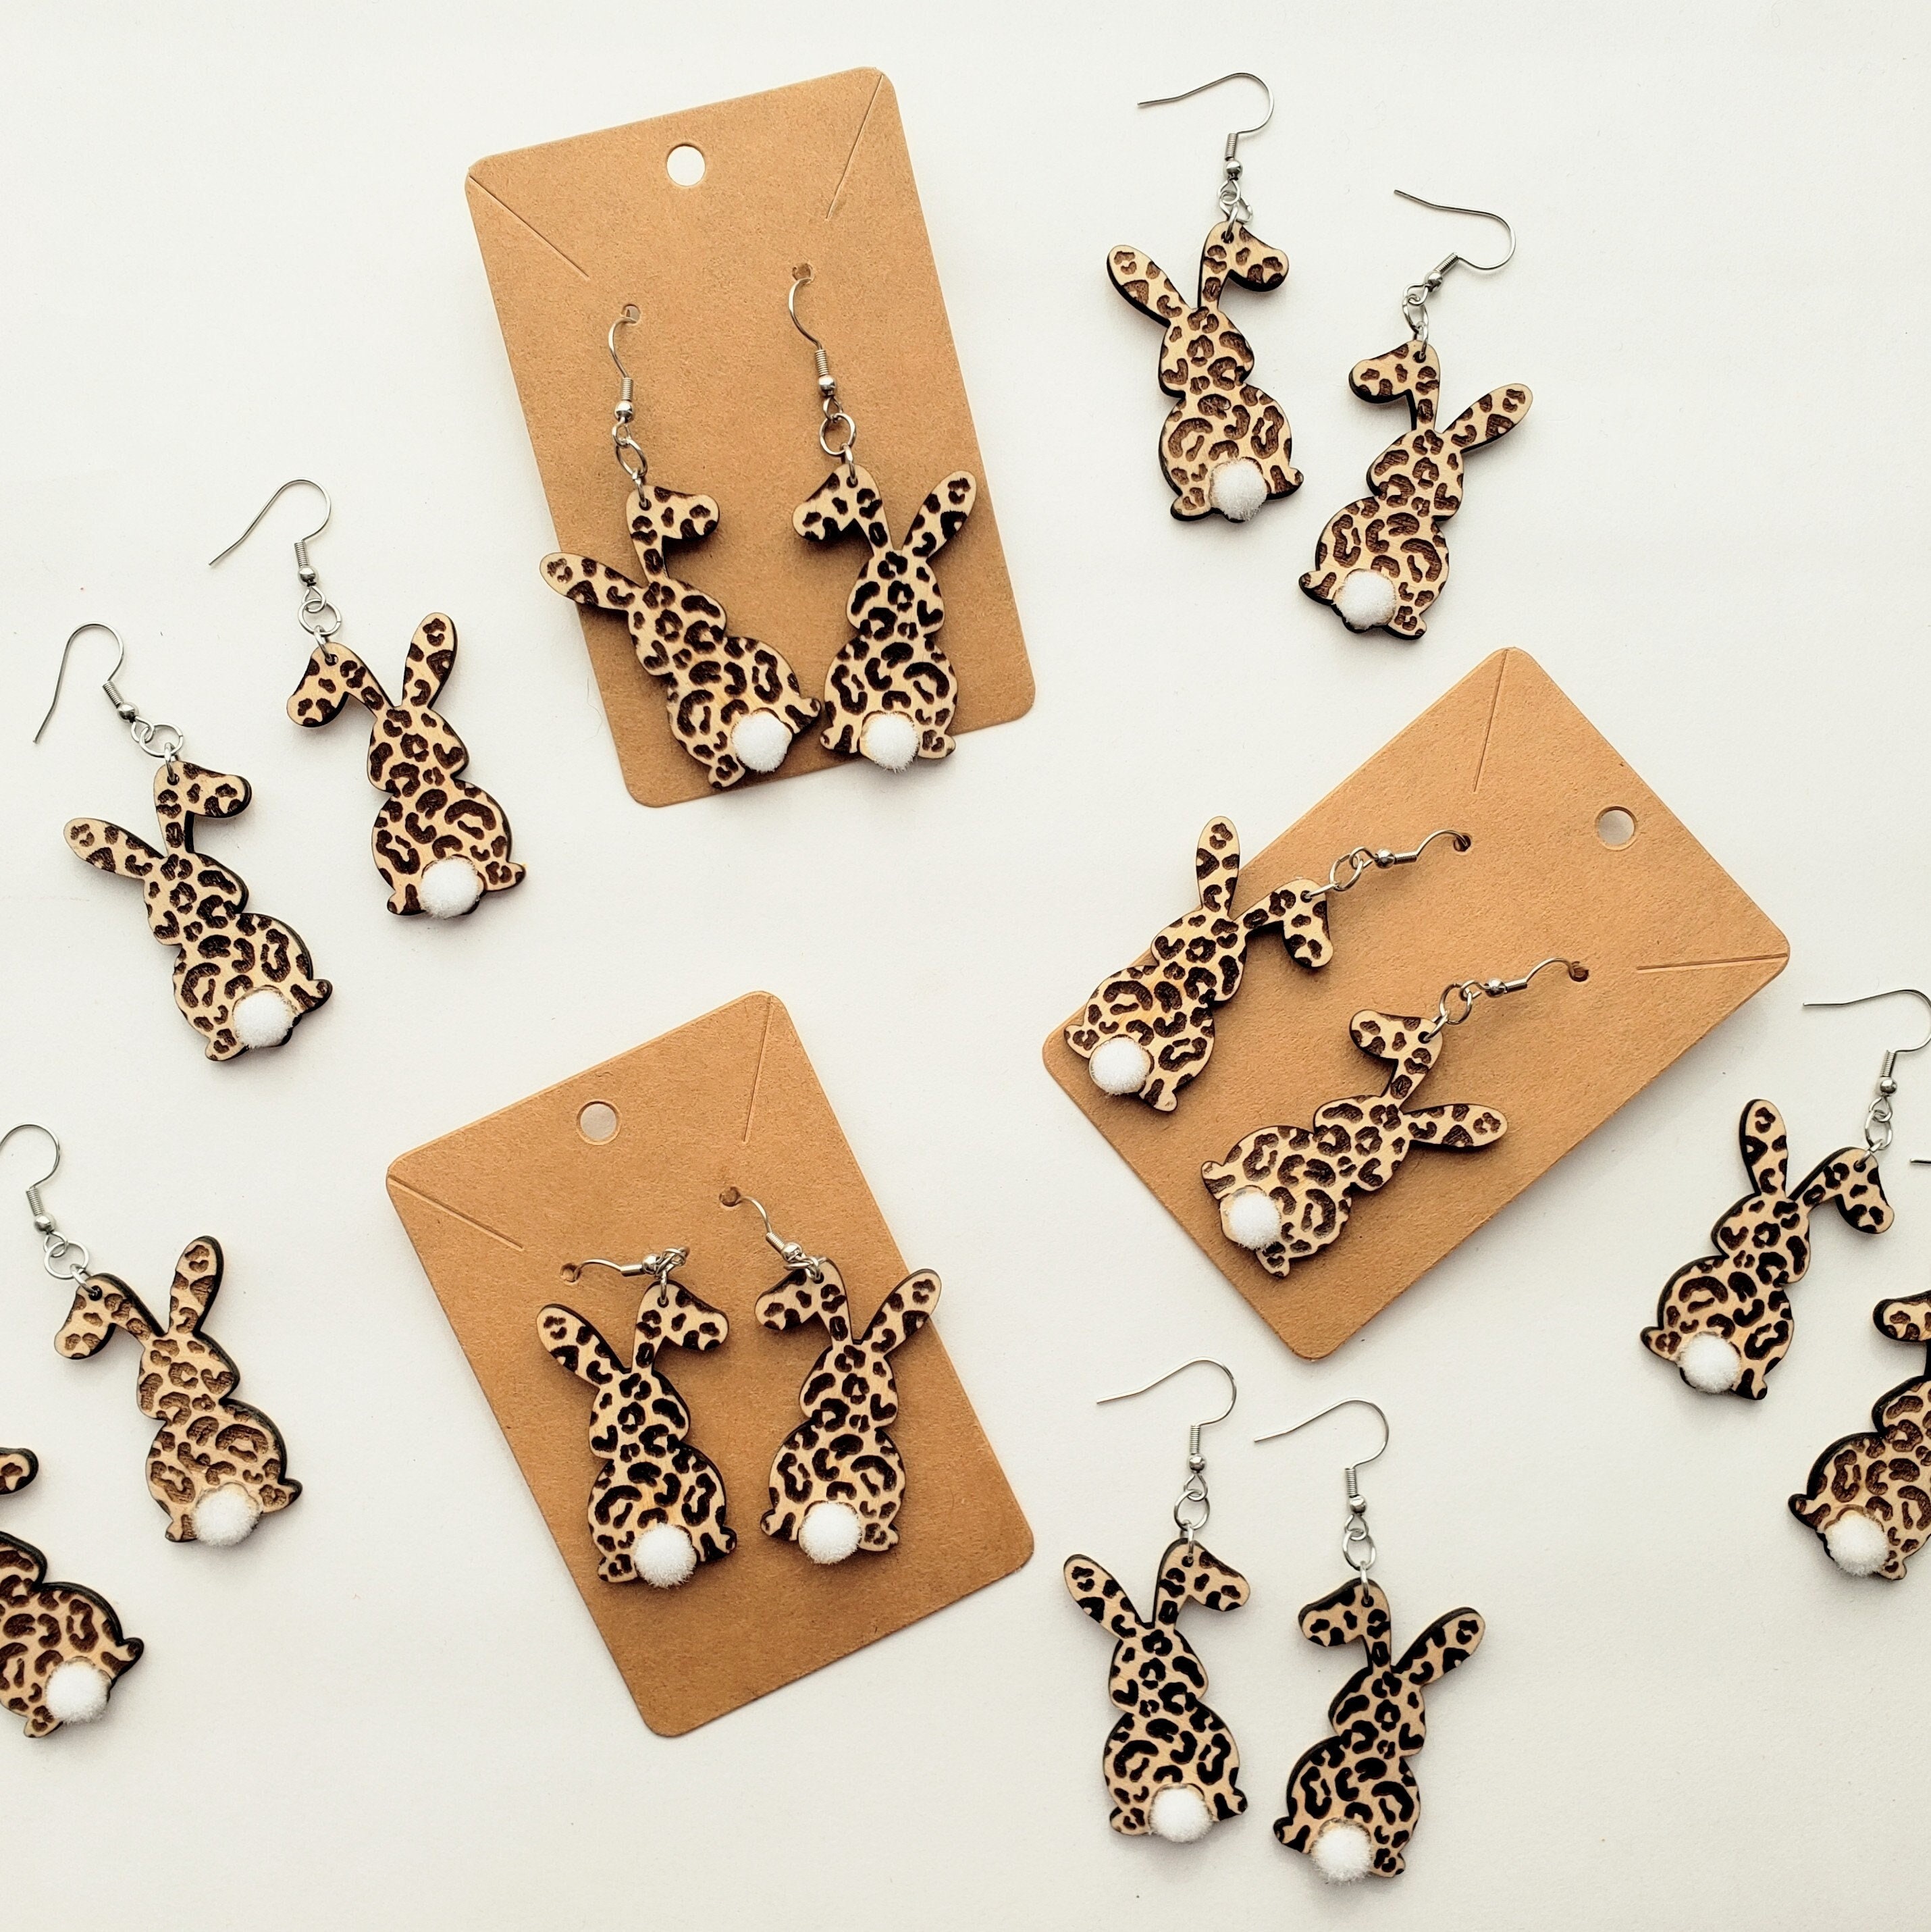 Vintage Leopard Stainless Steel Cuff Earrings Simple Clip Earring For Men  And Women Punk Style Fashion Jewelry Wholesale From Outlet7, $2.41